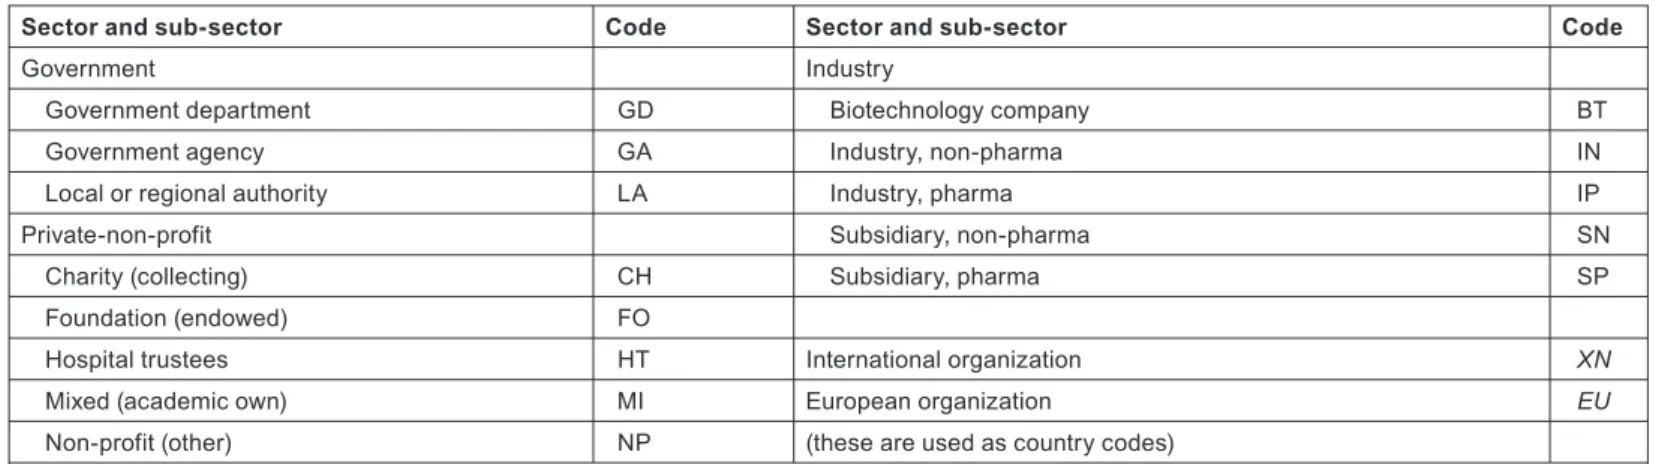 Table 7: List of codes for sectors and sub-sectors for the funders of paediatric oncology research